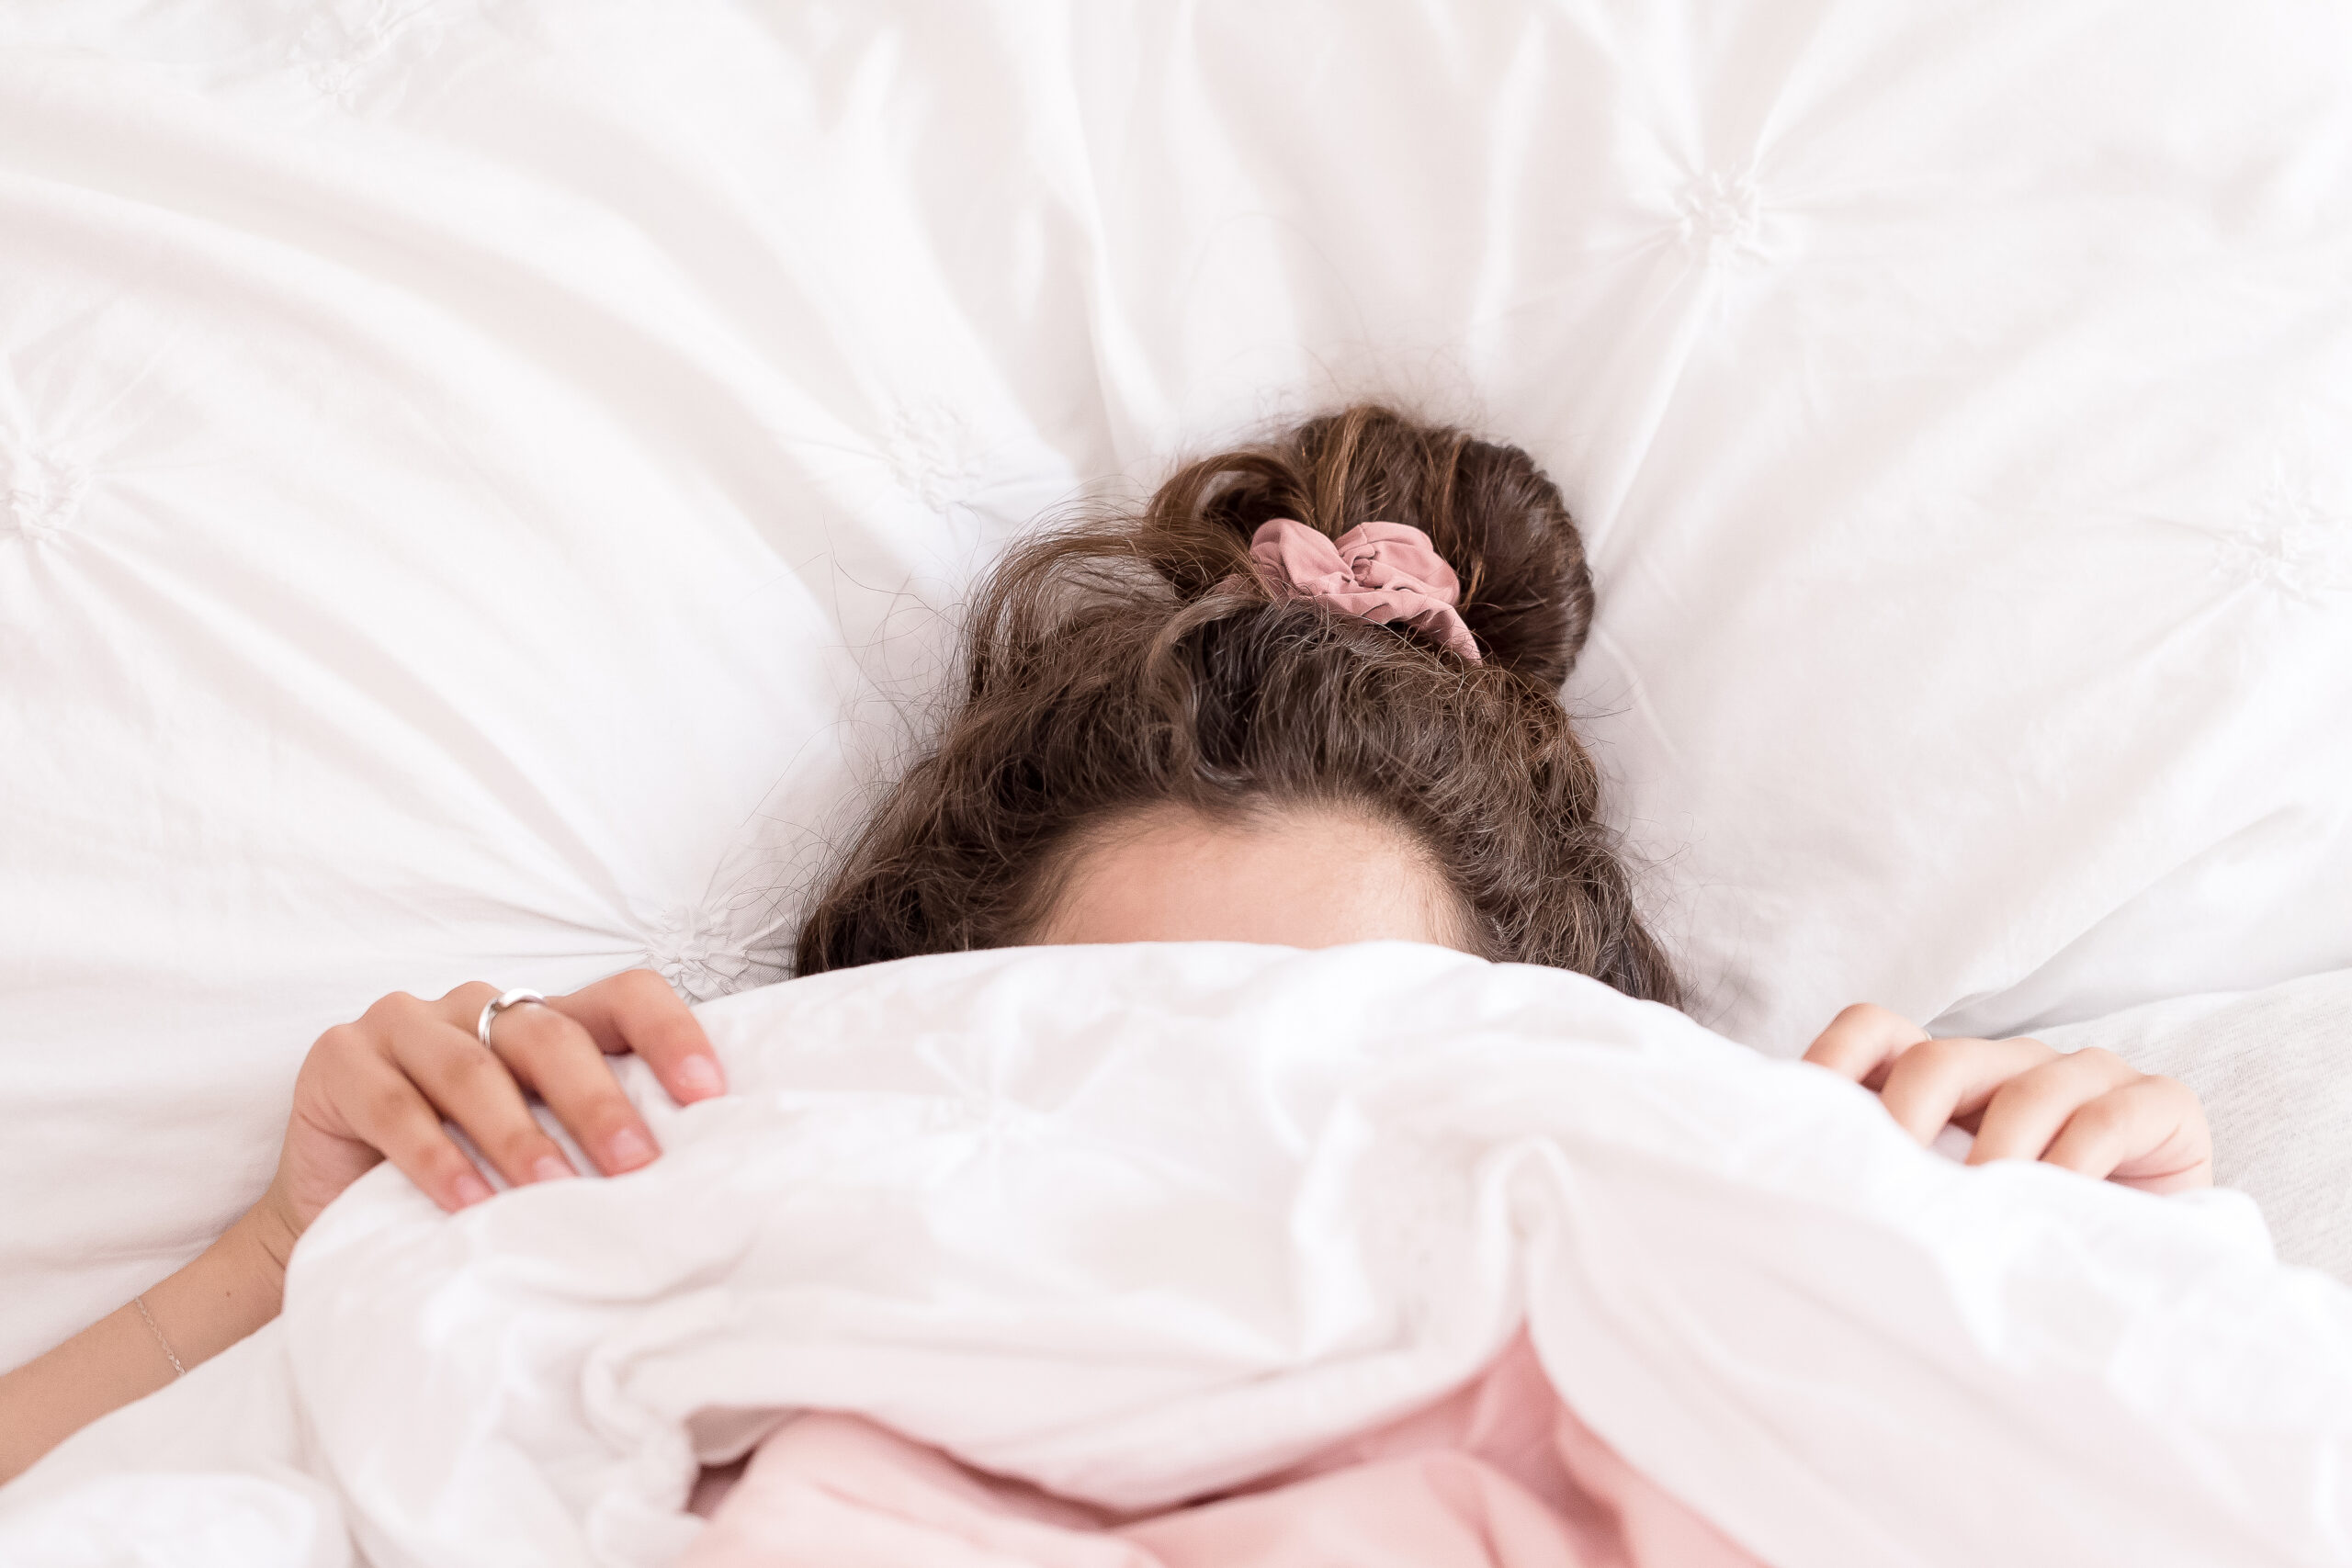 A person lies in bed partially hidden under white blankets with only the top of their head and hands visible. They have a pink scrunchie in their hair, perhaps reflecting a moment of relaxation after meditation.